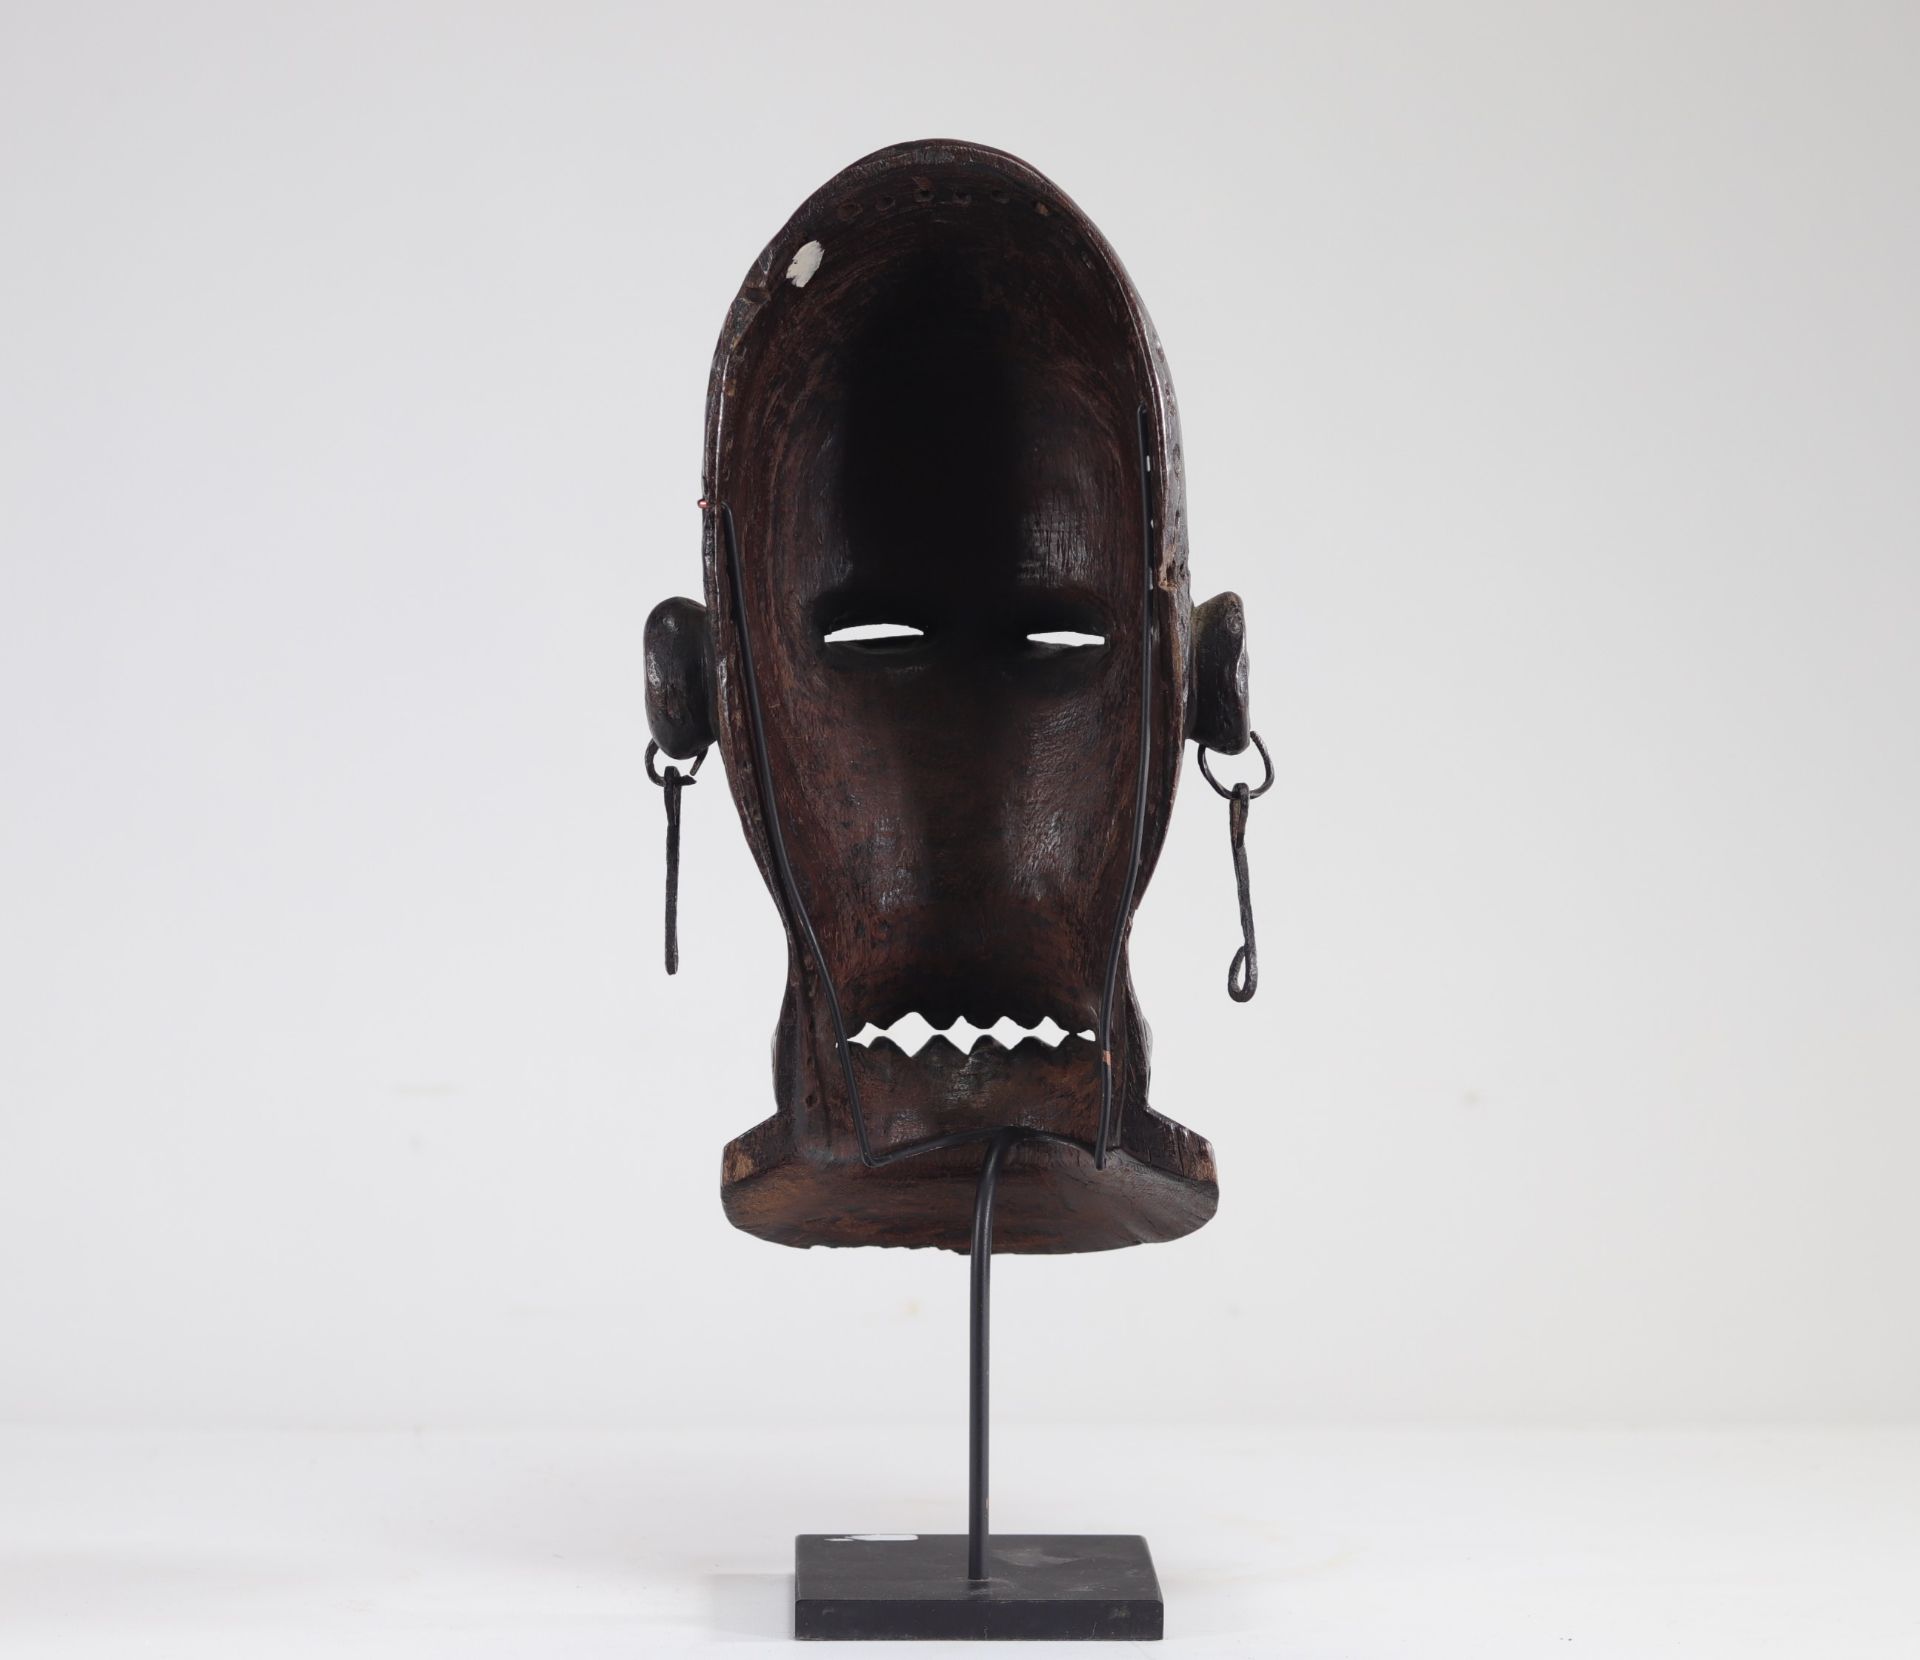 Tchokwe mask from the Rep. req. congo - Image 4 of 5